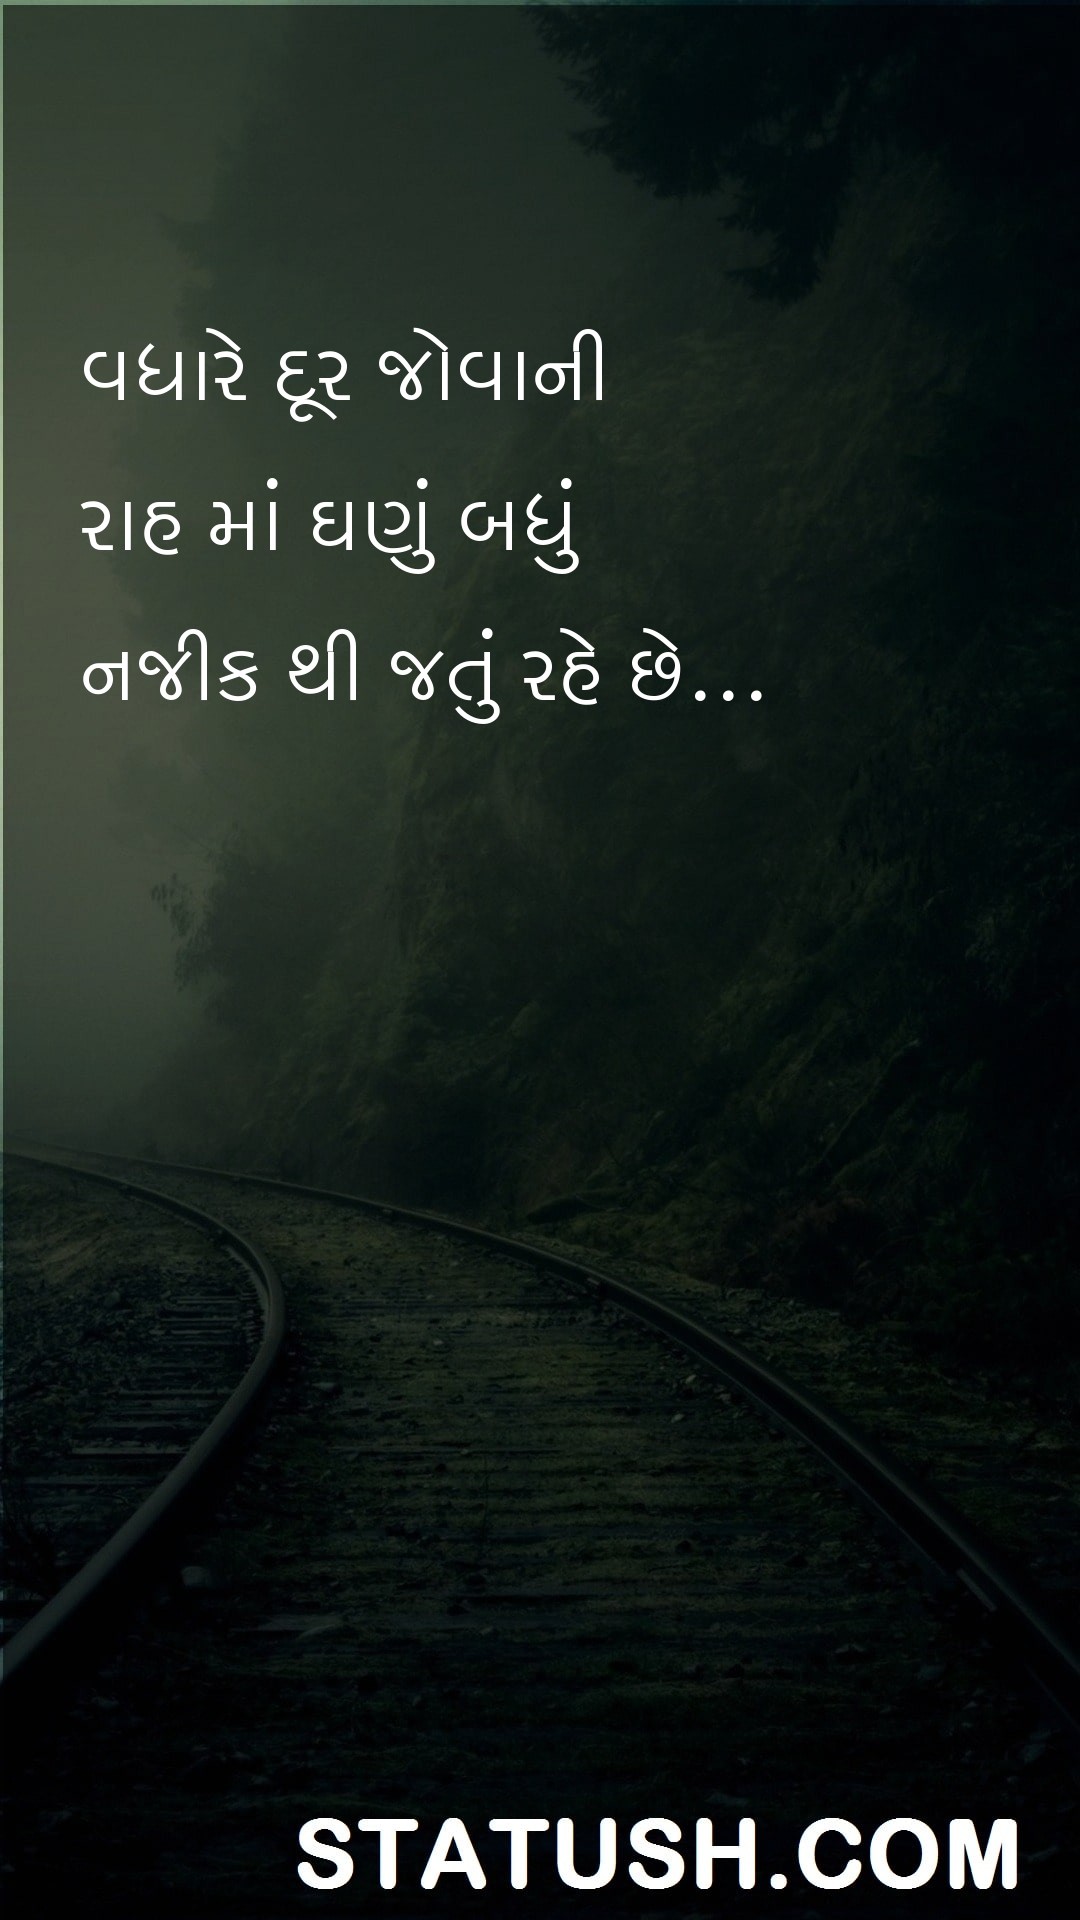 In looking farther A lot is going on Gujarati Quotes at statush.com